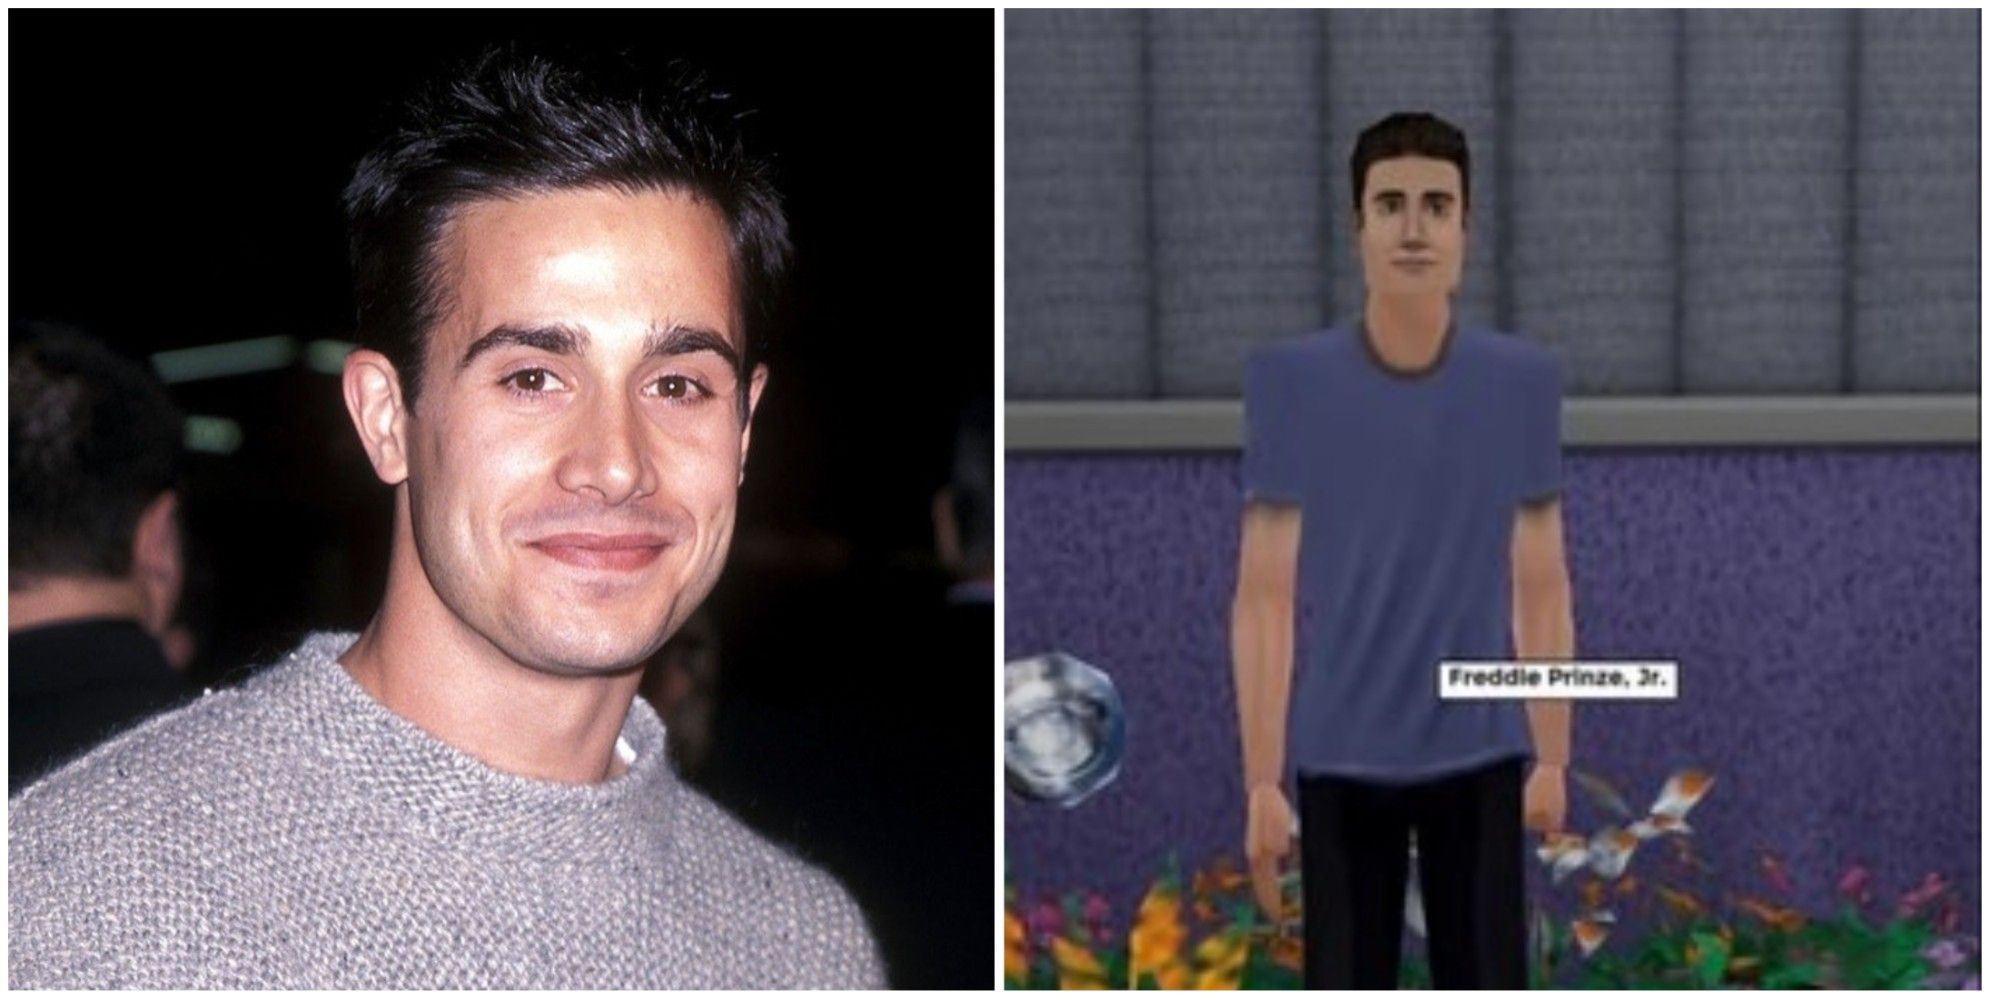 freddie prinze jr and his sims superstar adaptation